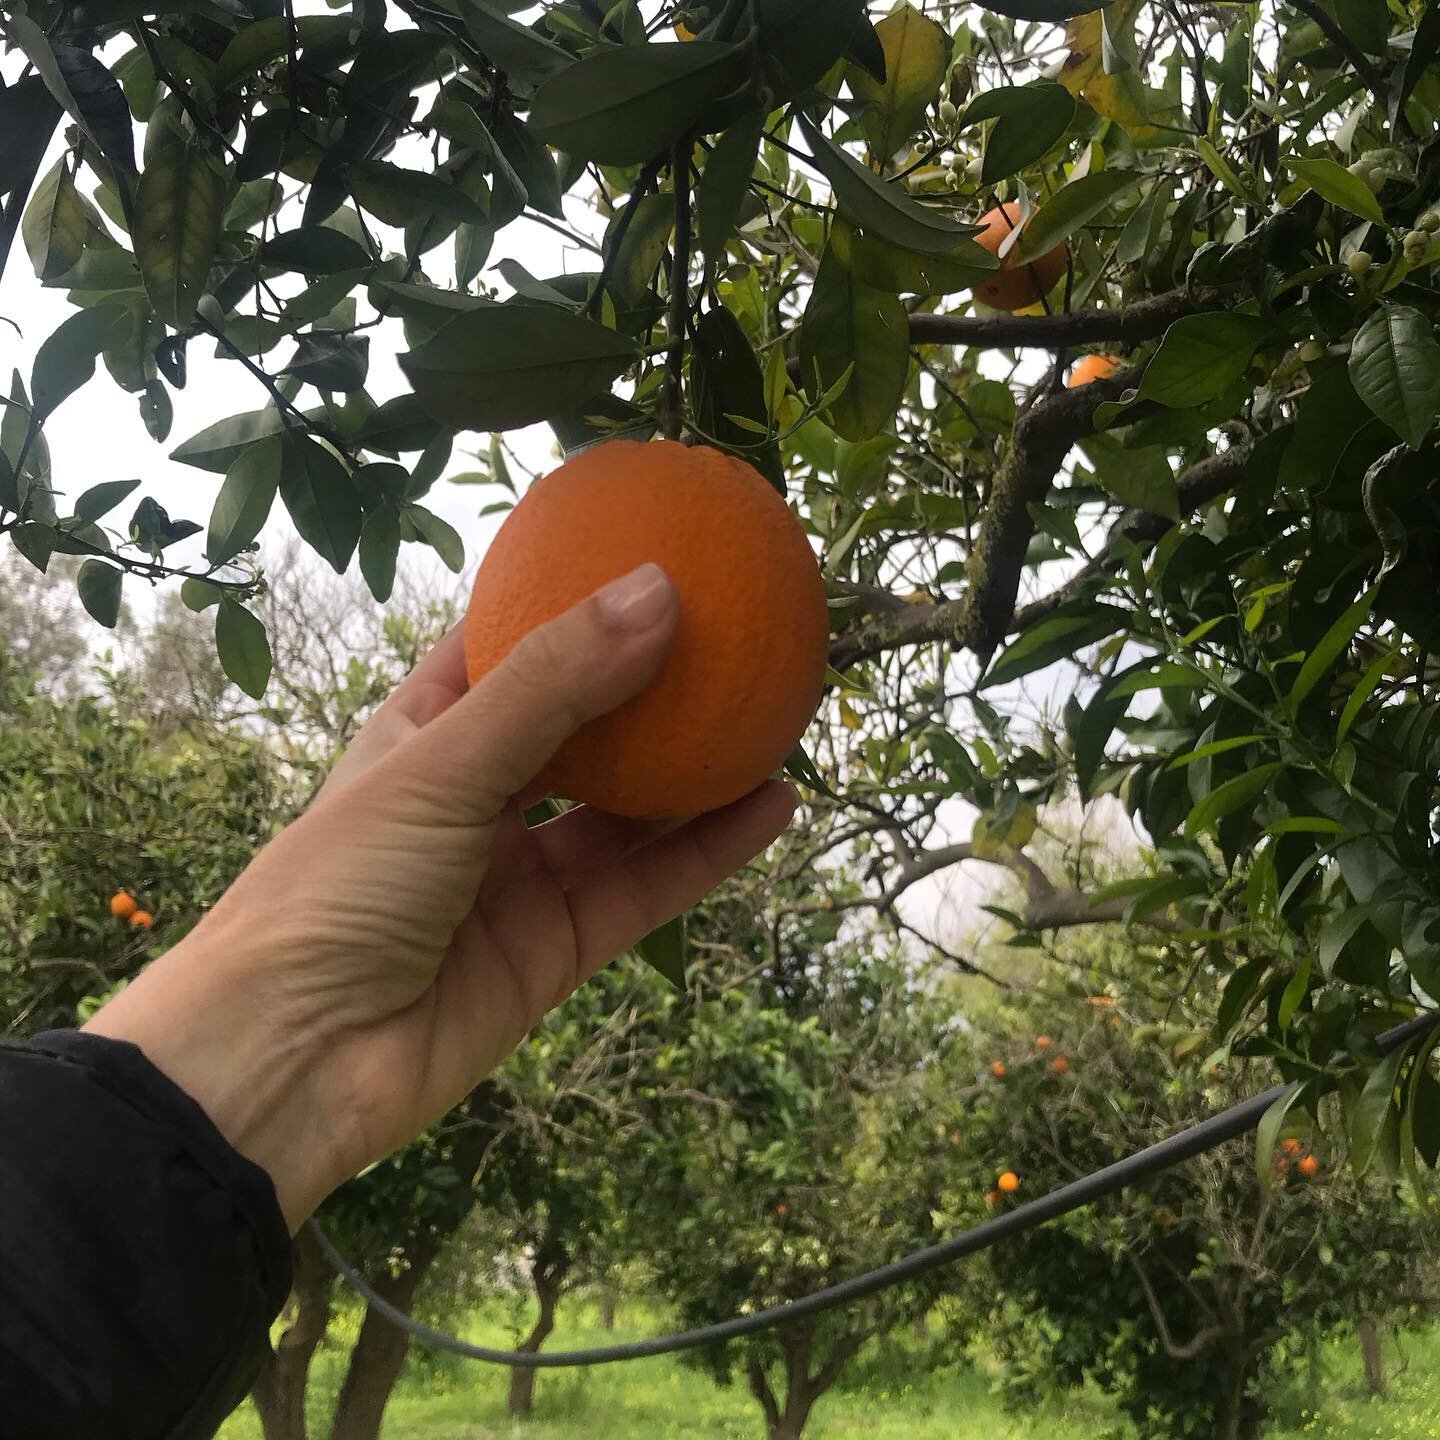 Picking oranges 🍊 🍊today 🍊enchanted by the smell of the orange blossoms 🍊 #greece🇬🇷 🇬🇷 #crete🇬🇷 #chaniagreece #orangegrove #orangeblossom #aromatherapy #naturelovers #fruits #spring #lovespring #summer2021 #vacations #visitchania #summerhou